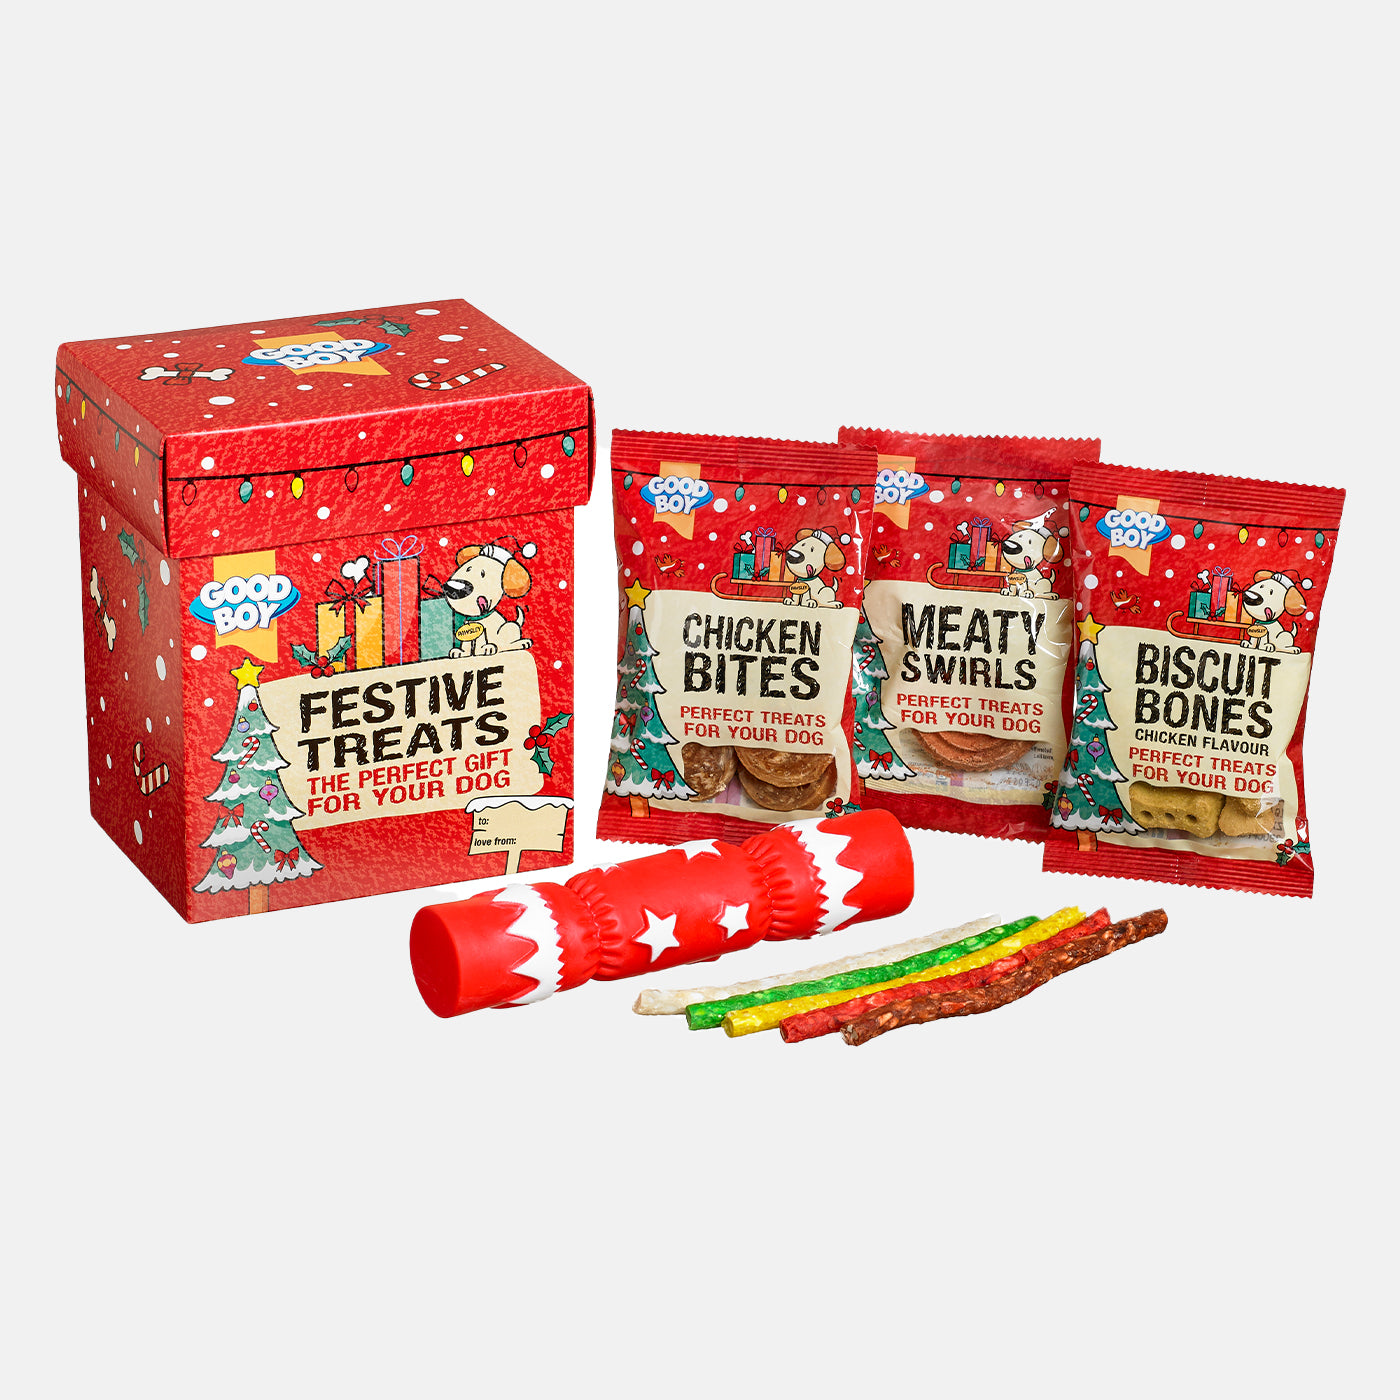 Good Boy Festive Dog Treats Gift Box, The Perfect Christmas Gift For Your Dog, Available Now at Lords & Labradors